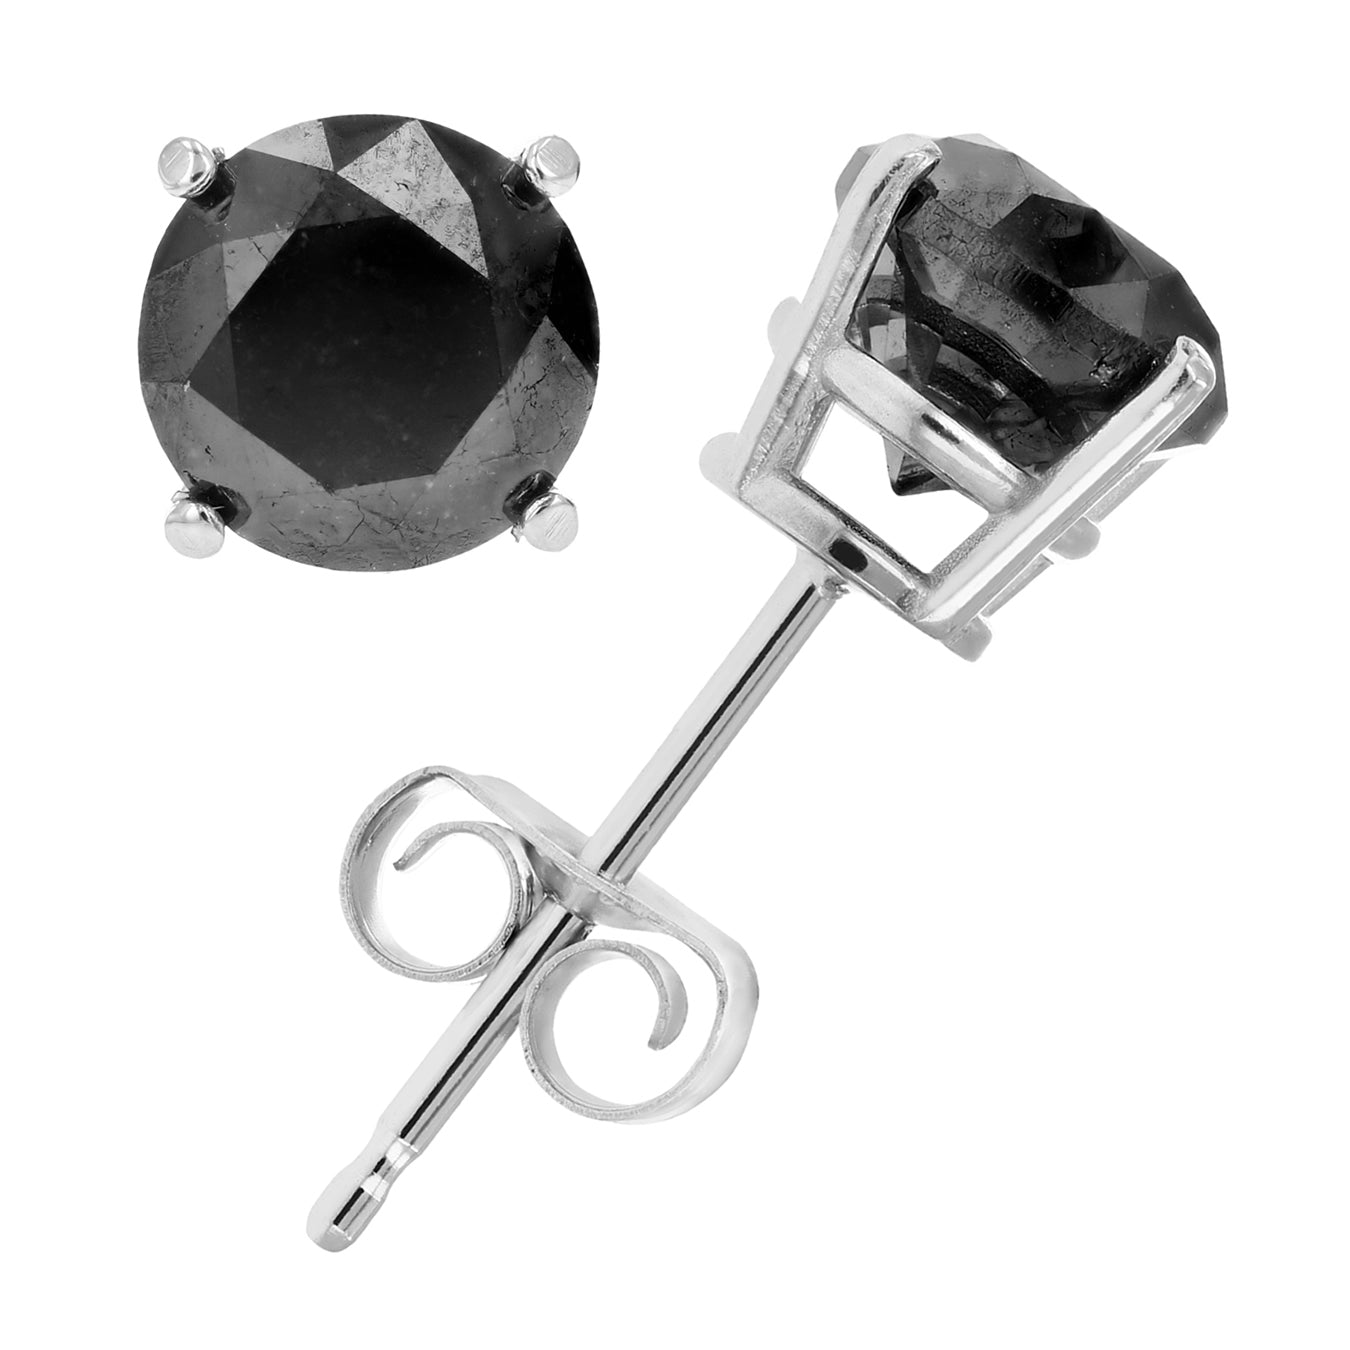 7 cttw Black Diamond Stud Earrings .925 Sterling Silver Round with Push Backs